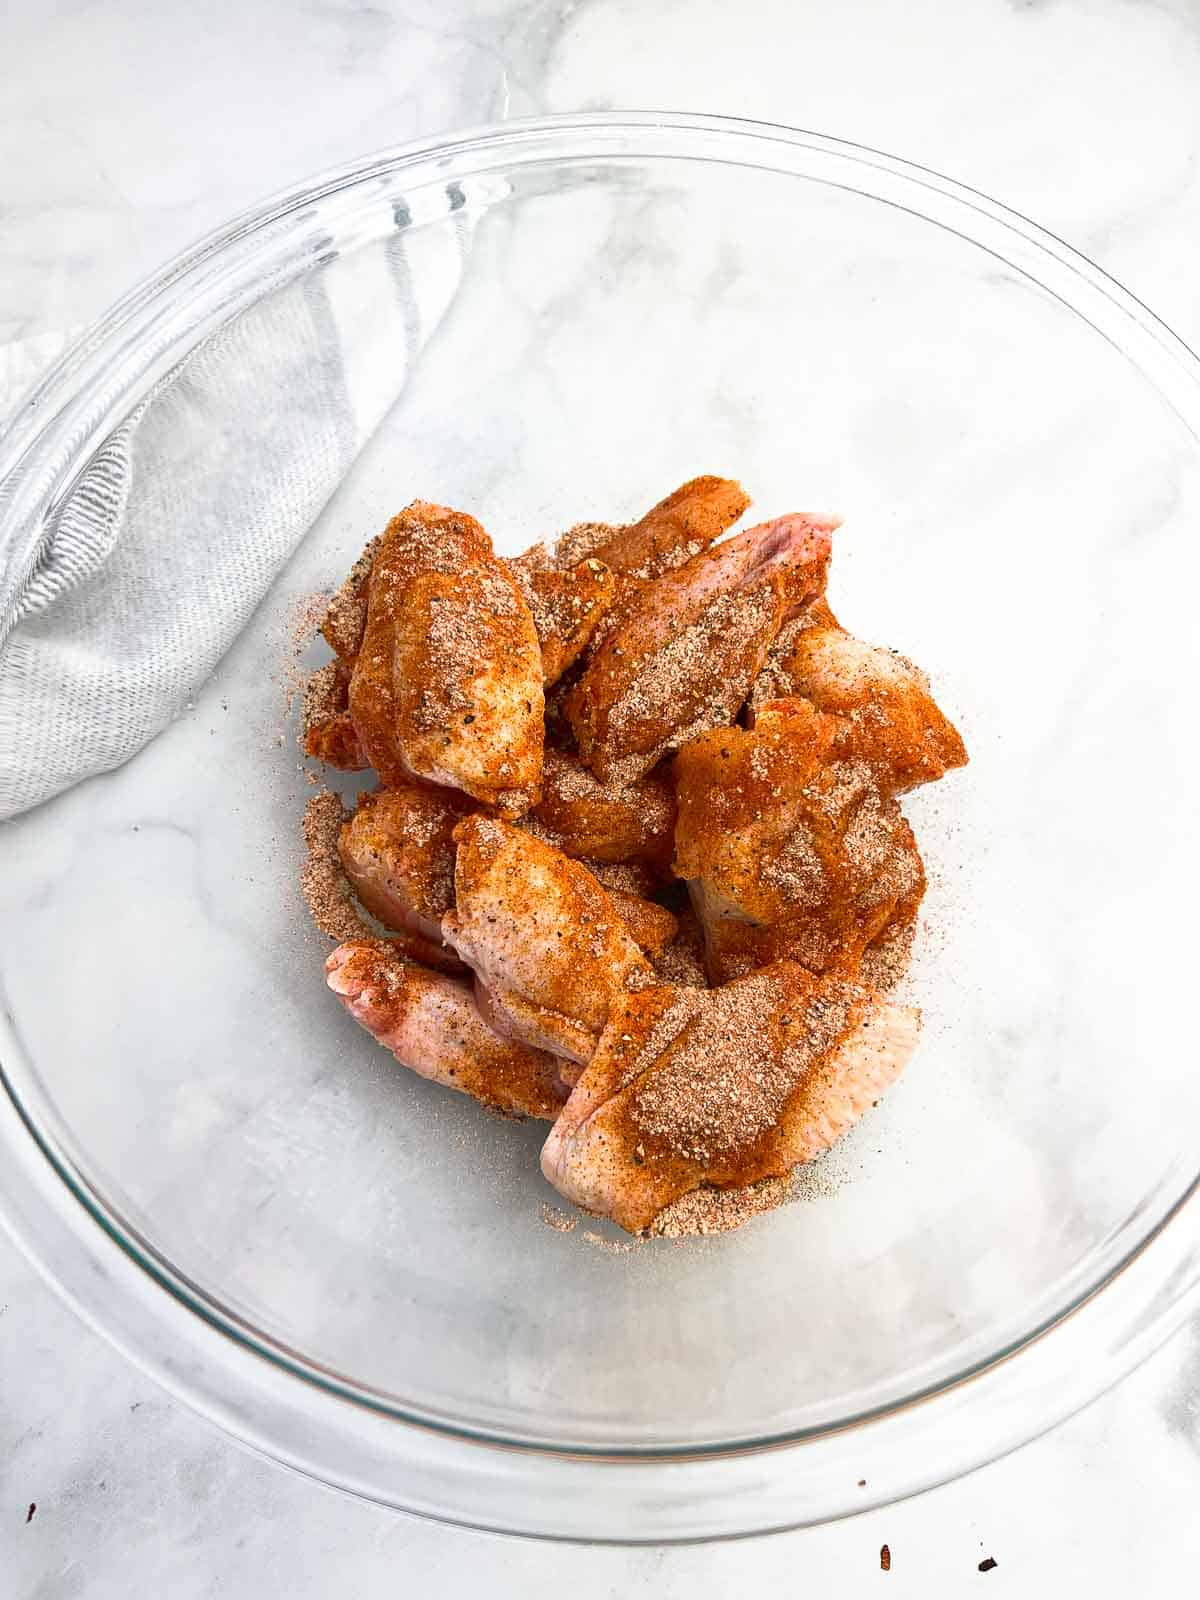 Chicken wings in a glass bowls tossed with poultry seasoning.